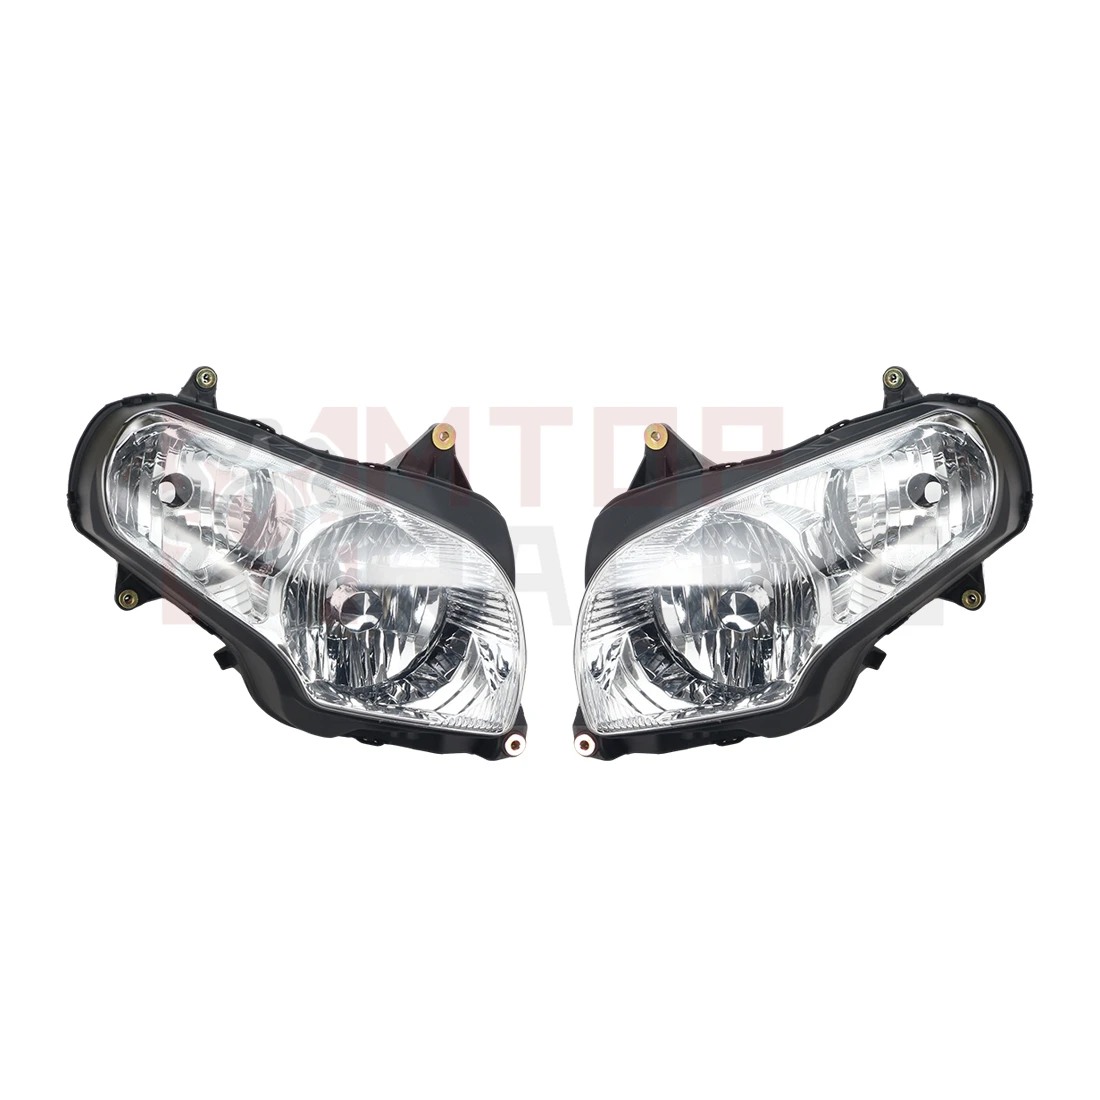 

Motorcycle Headlight Assembly Head Lamp For Honda GL1800 2001-2010 Goldwing Front Headlamp 33100-MCA-A61 2002 03 04 05 06 07 08